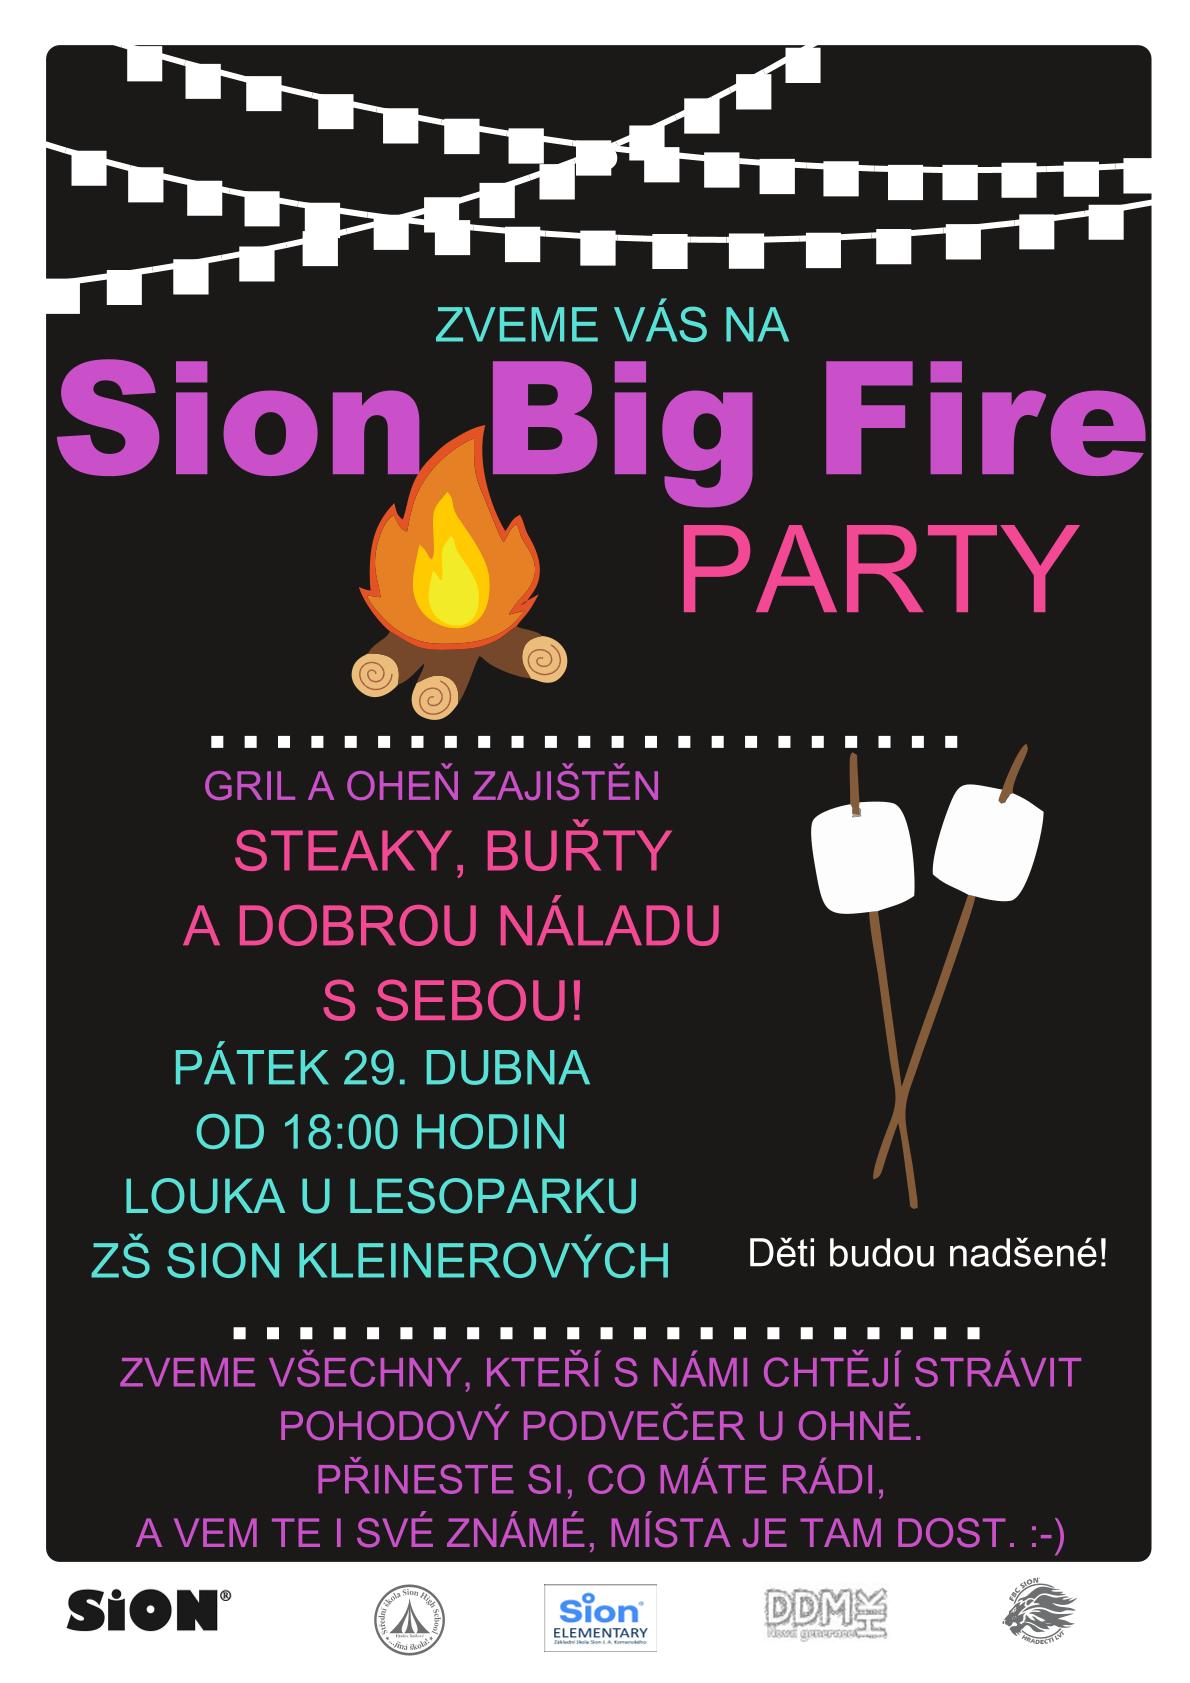 Sion Big Fire Party